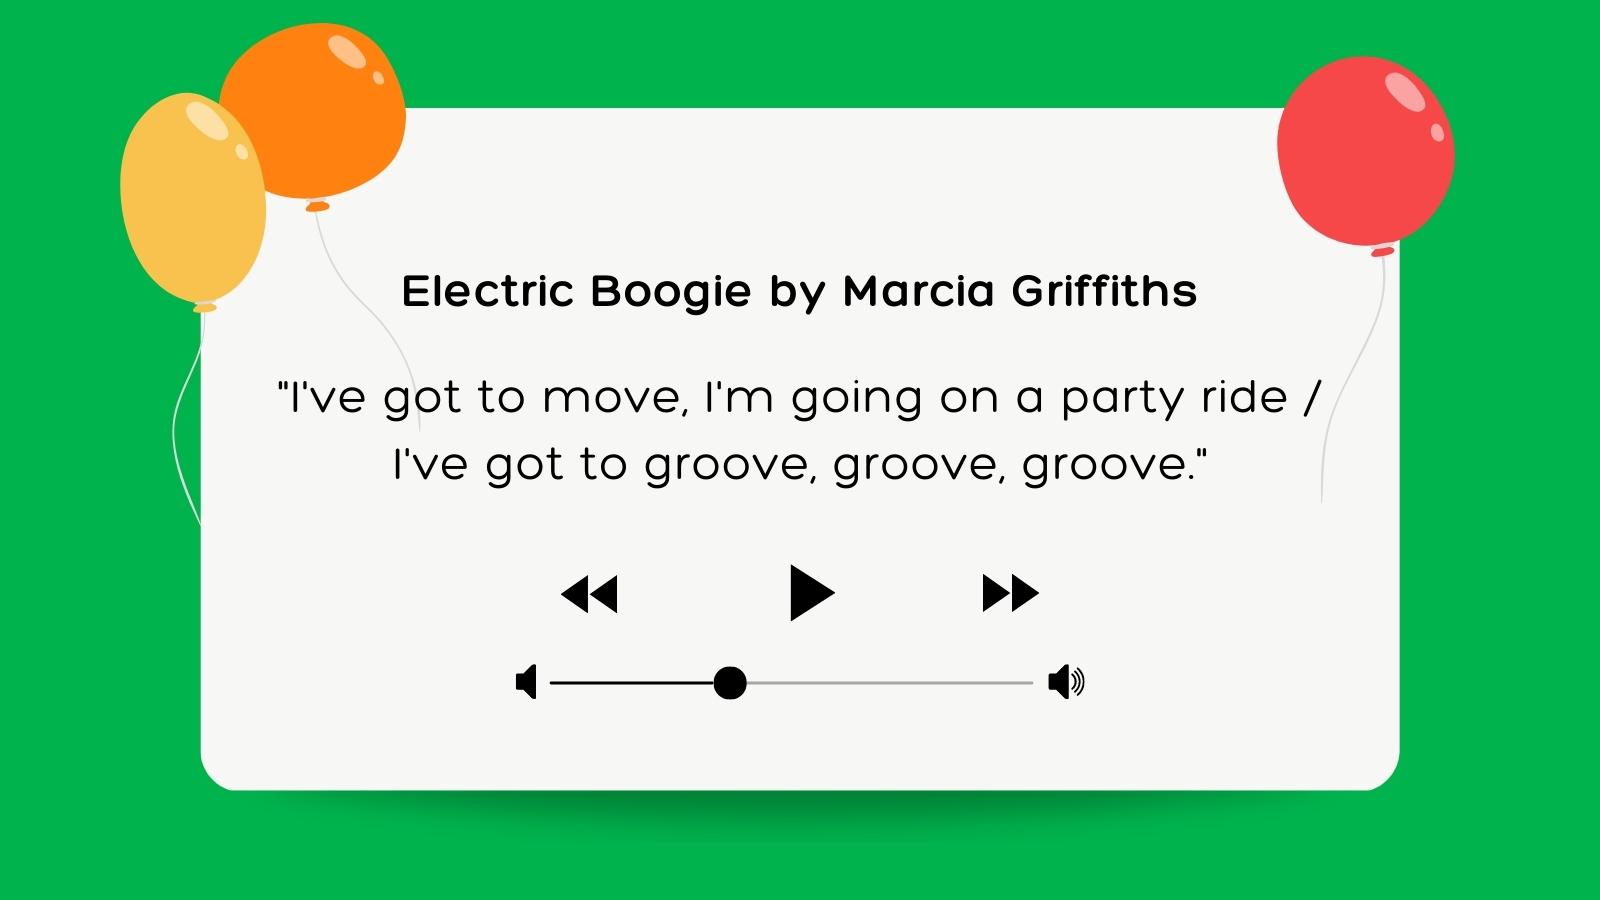 Electric Boogie by Martin Griffiths.